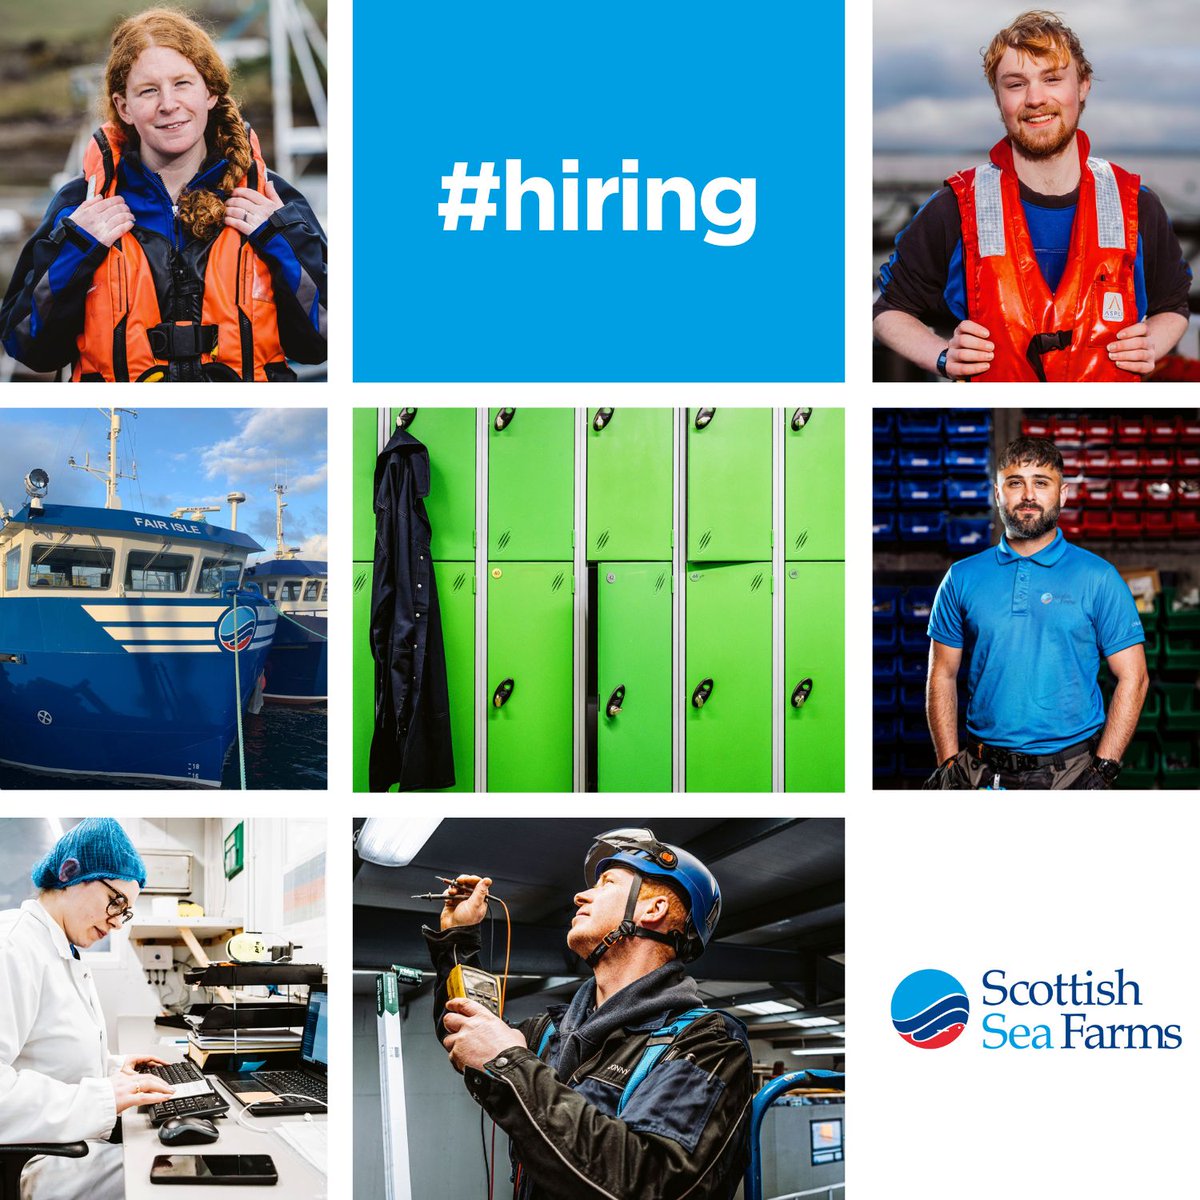 JOBS ROUND-UP | We have a mix of roles in this week’s #jobsroundup: 🐟 ARGYLL Quality Supervisor / Processing Staff ORKNEY First Mate - Fair Isle / Marine Husbandry SHETLAND Marine Electrician / Freshwater Electrical/Maintenance Engineer More details > bit.ly/3PhpXIo